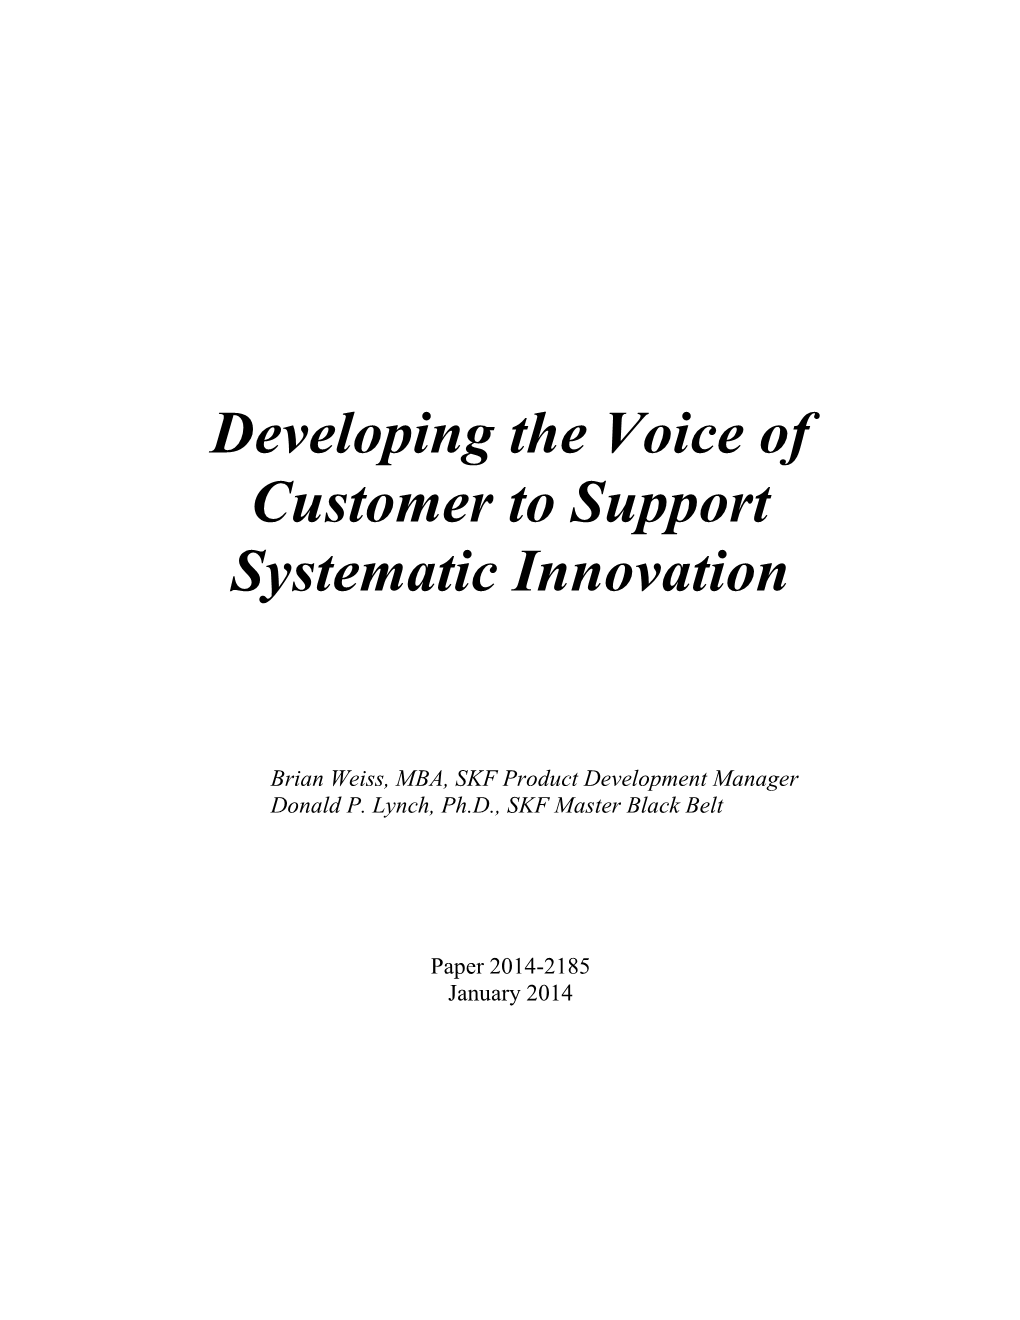 Developing the Voice of Customer to Support Systematic Innovation